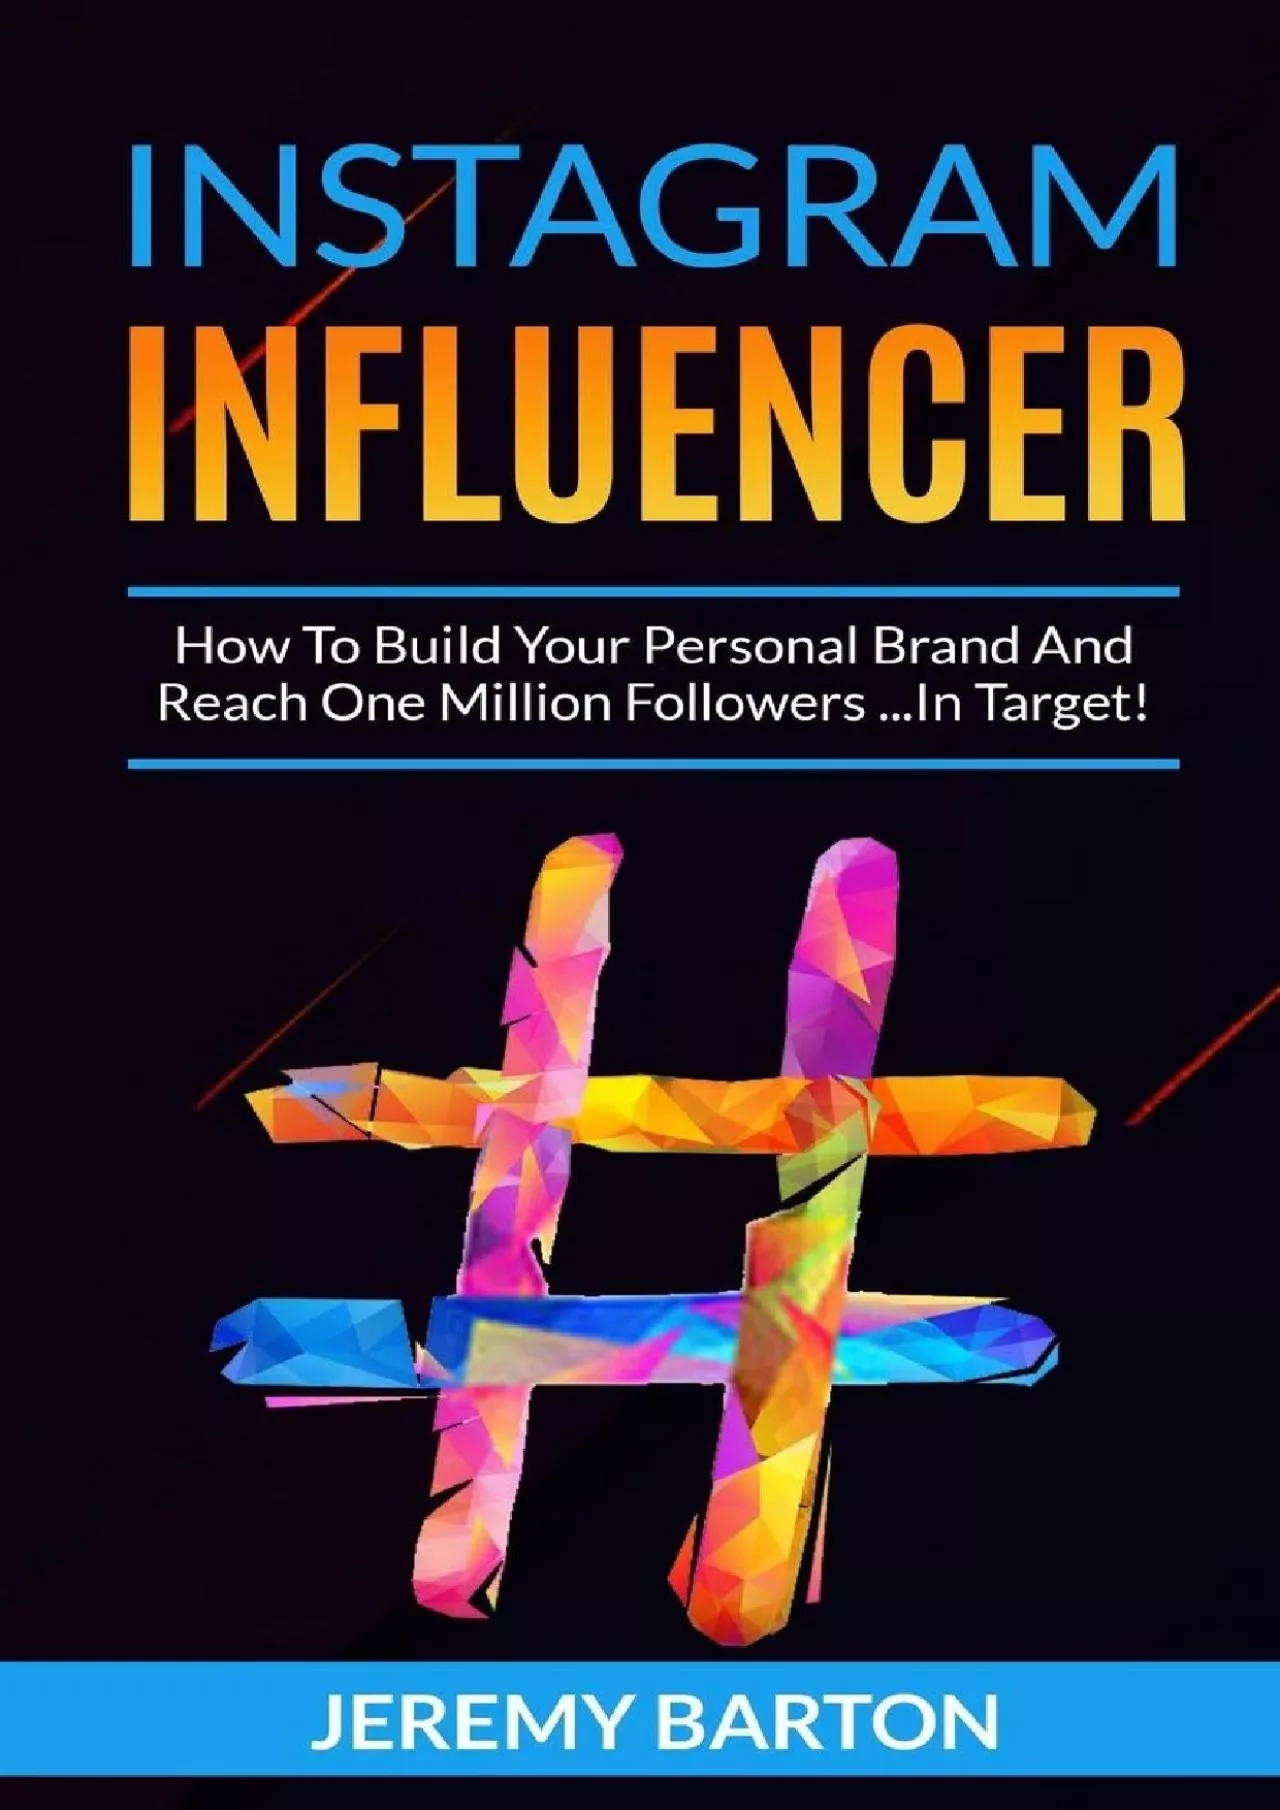 INSTAGRAM INFLUENCER: How To Build Your Personal Brand And Reach One Million Followers